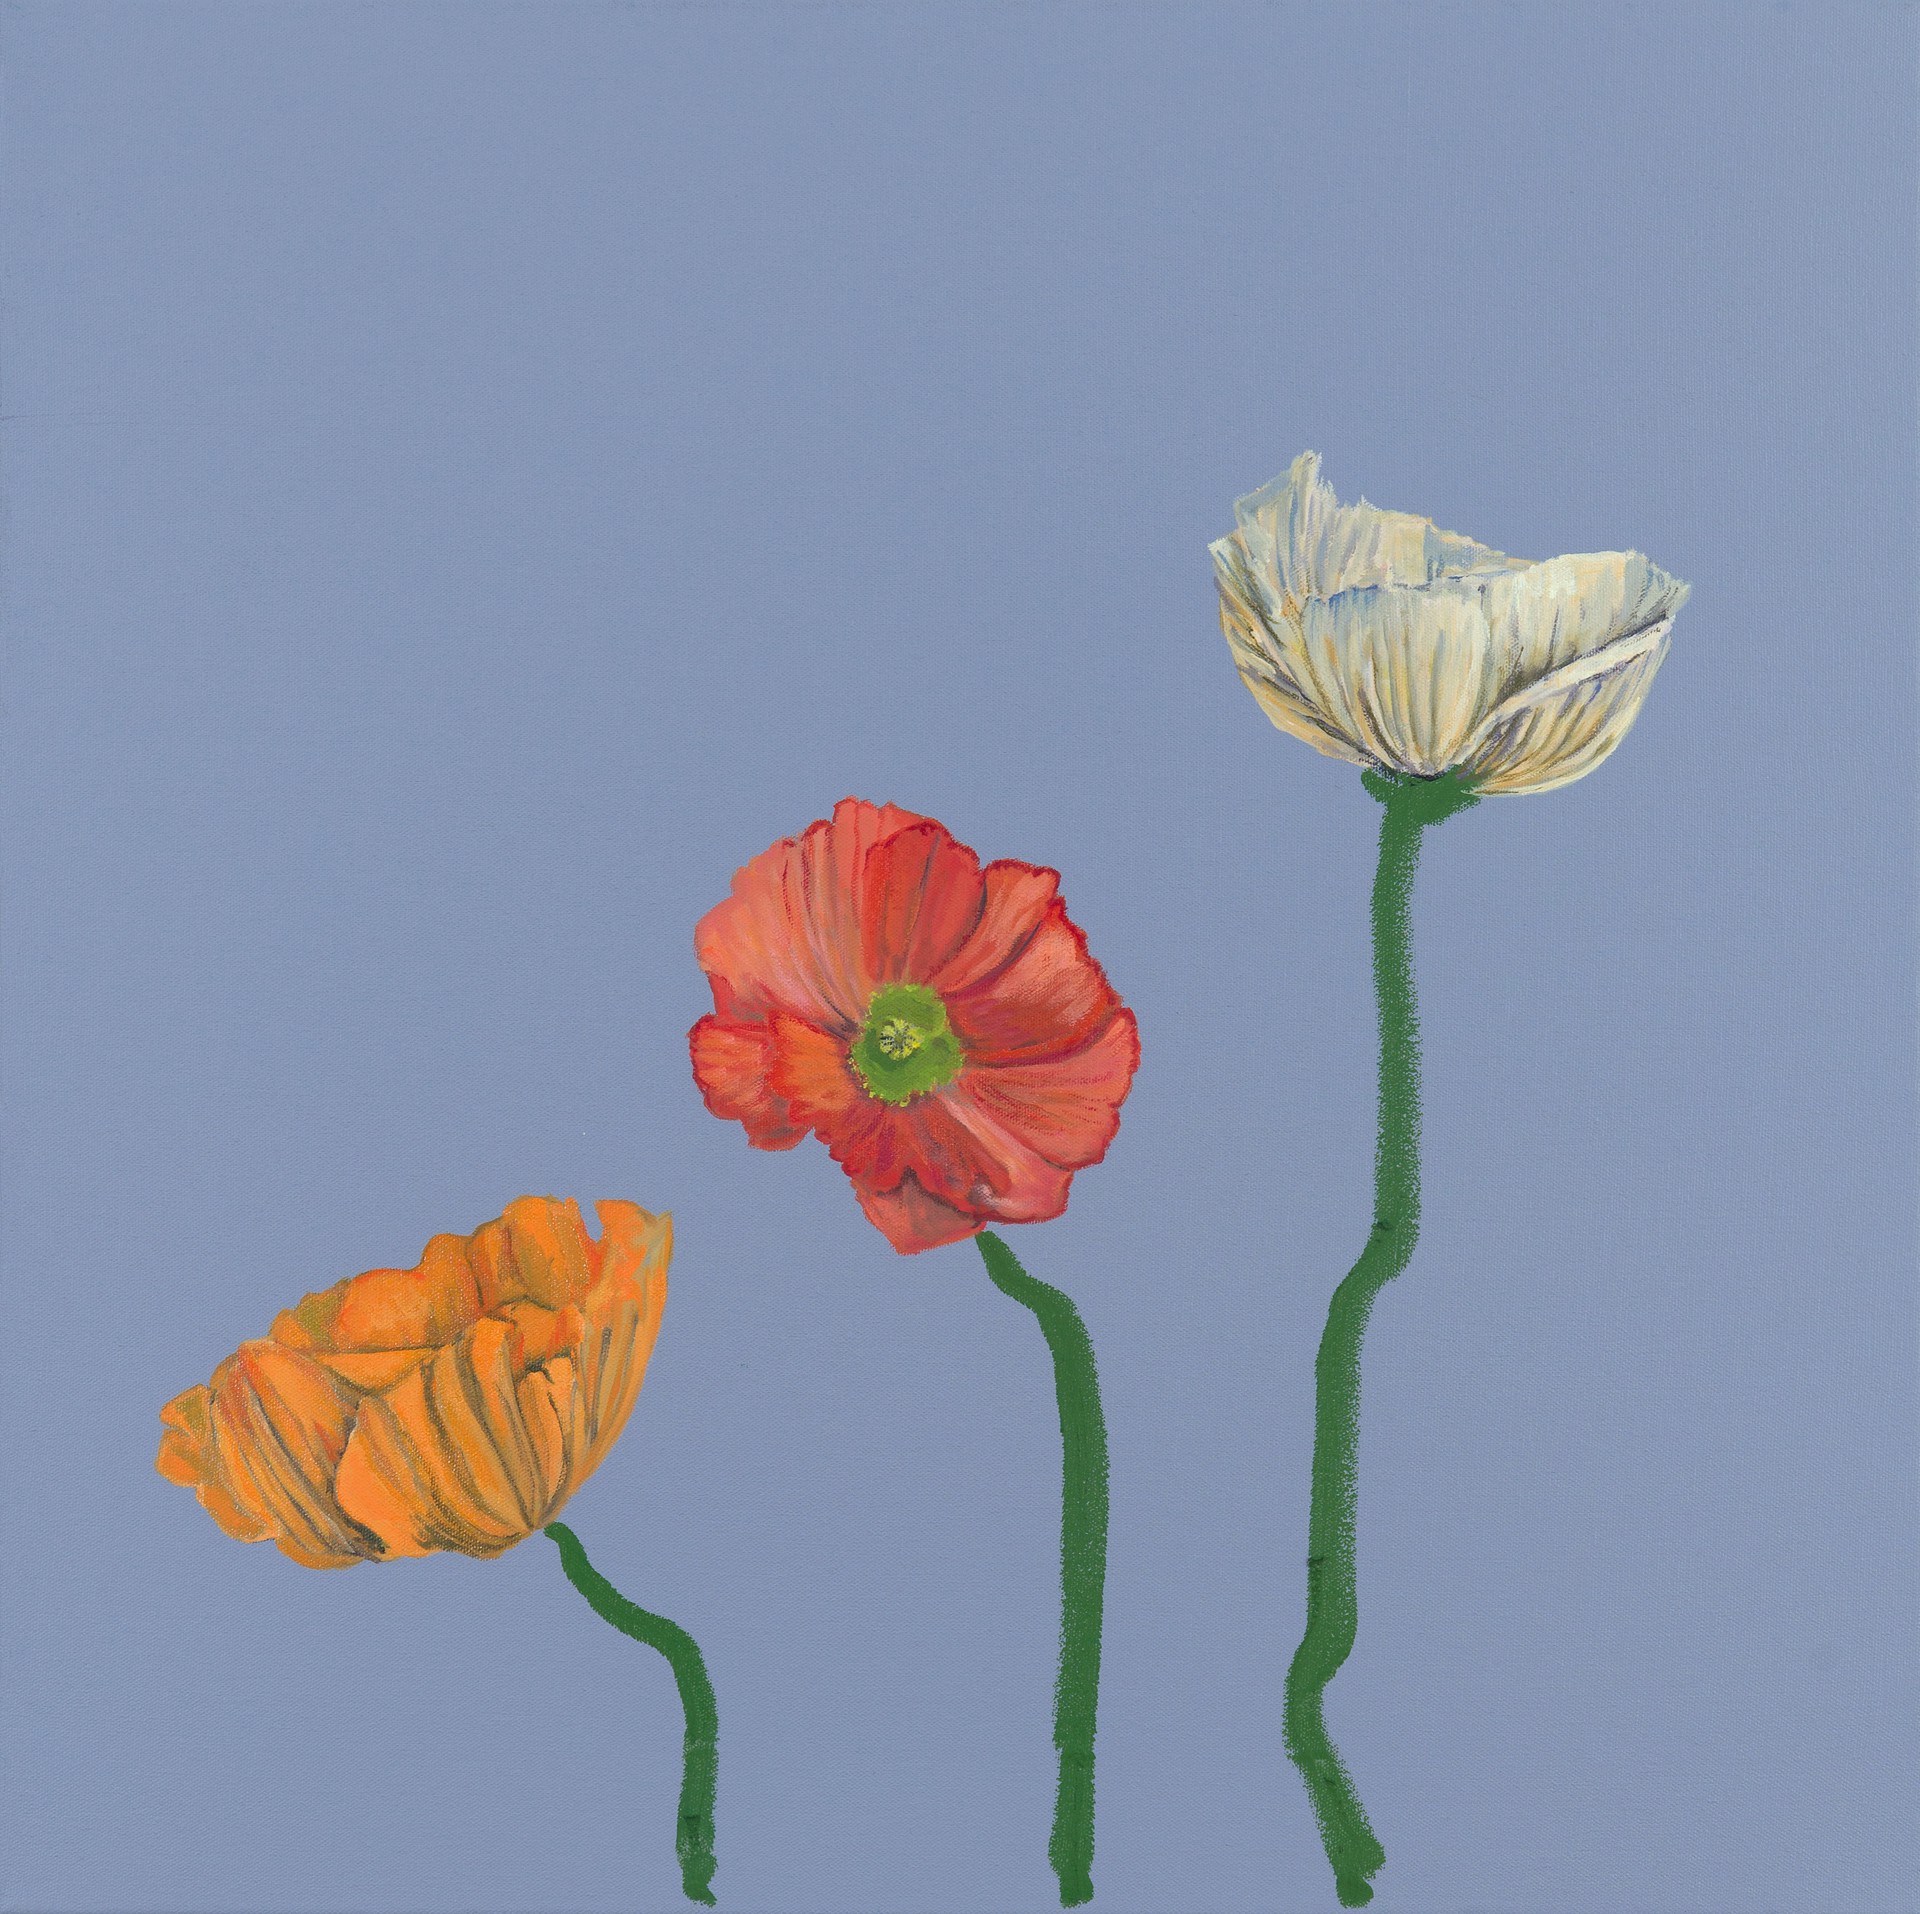 BODEGA BLOOMS (POPPIES) by ADAM UMBACH